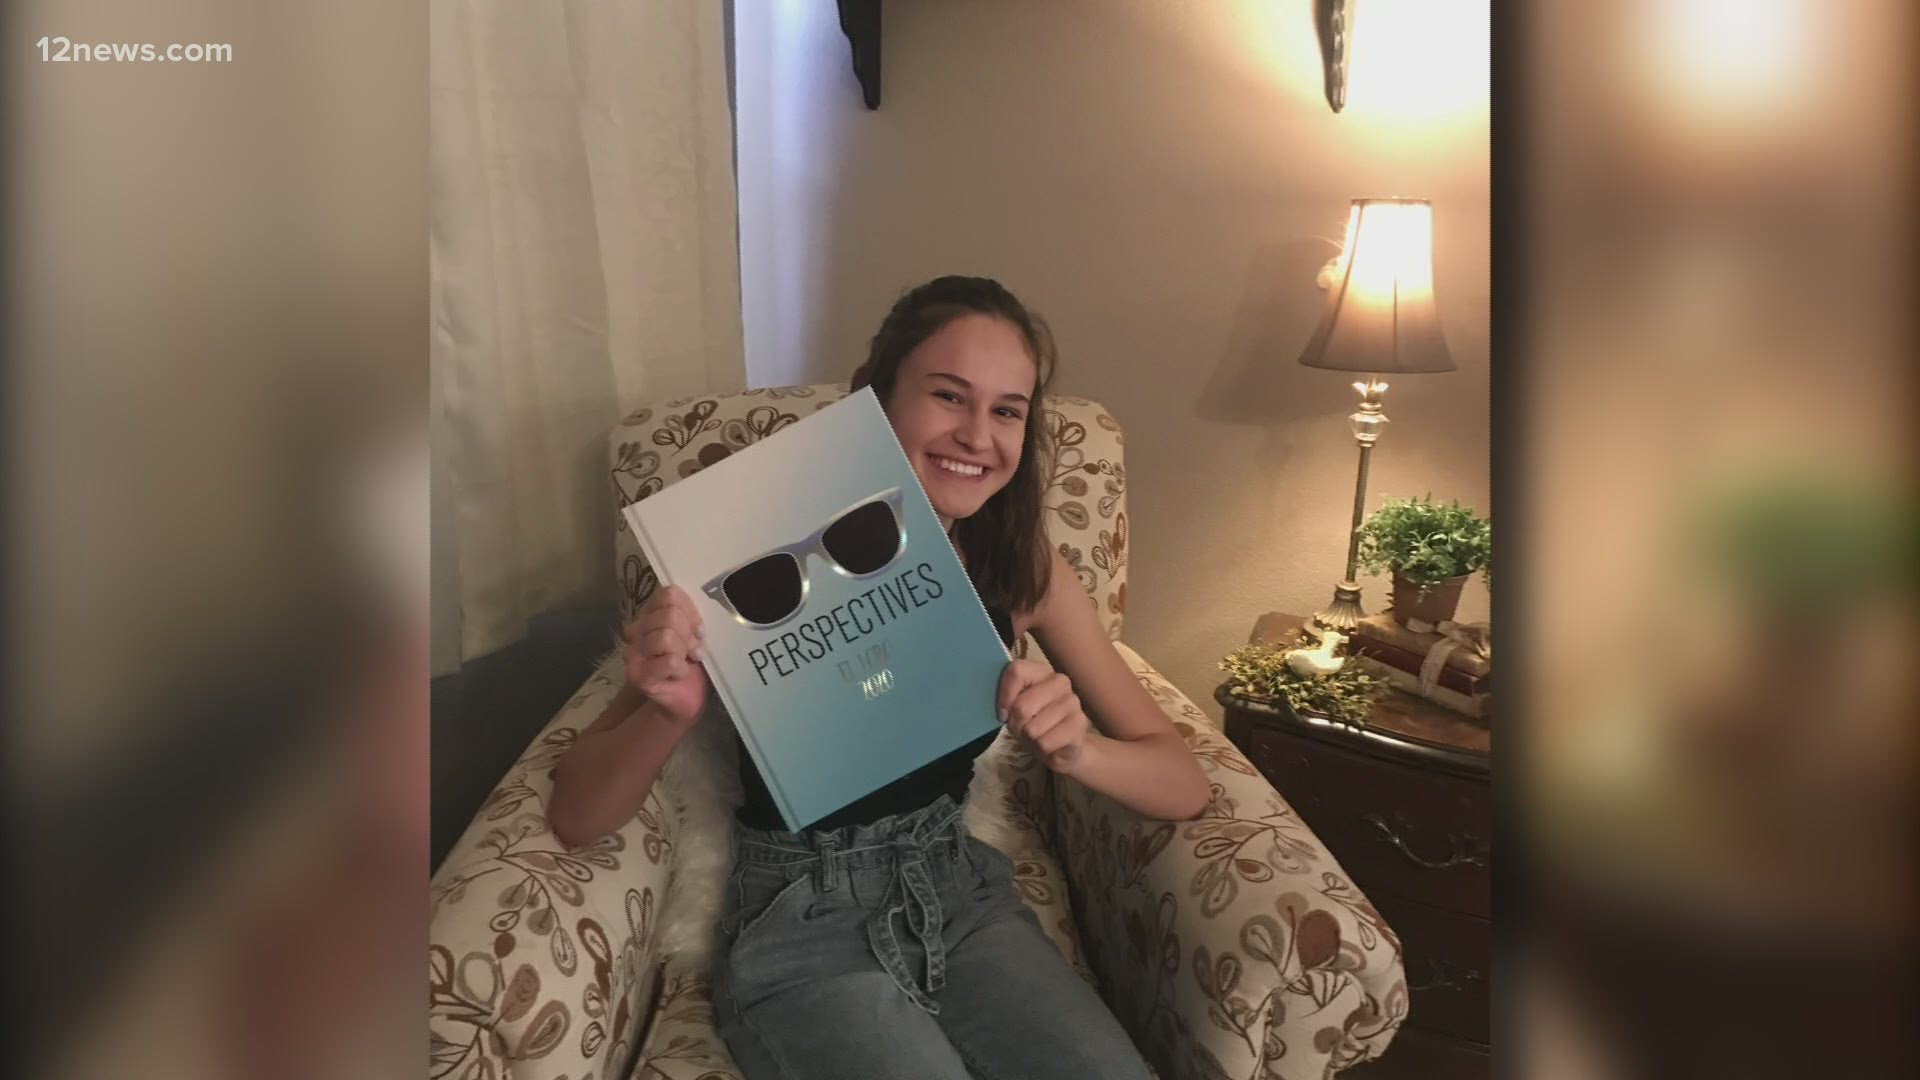 Despite COVID-19, high school seniors still have yearbooks to mark their time in school. A Chandler mom turned to social media to find her daughter one.